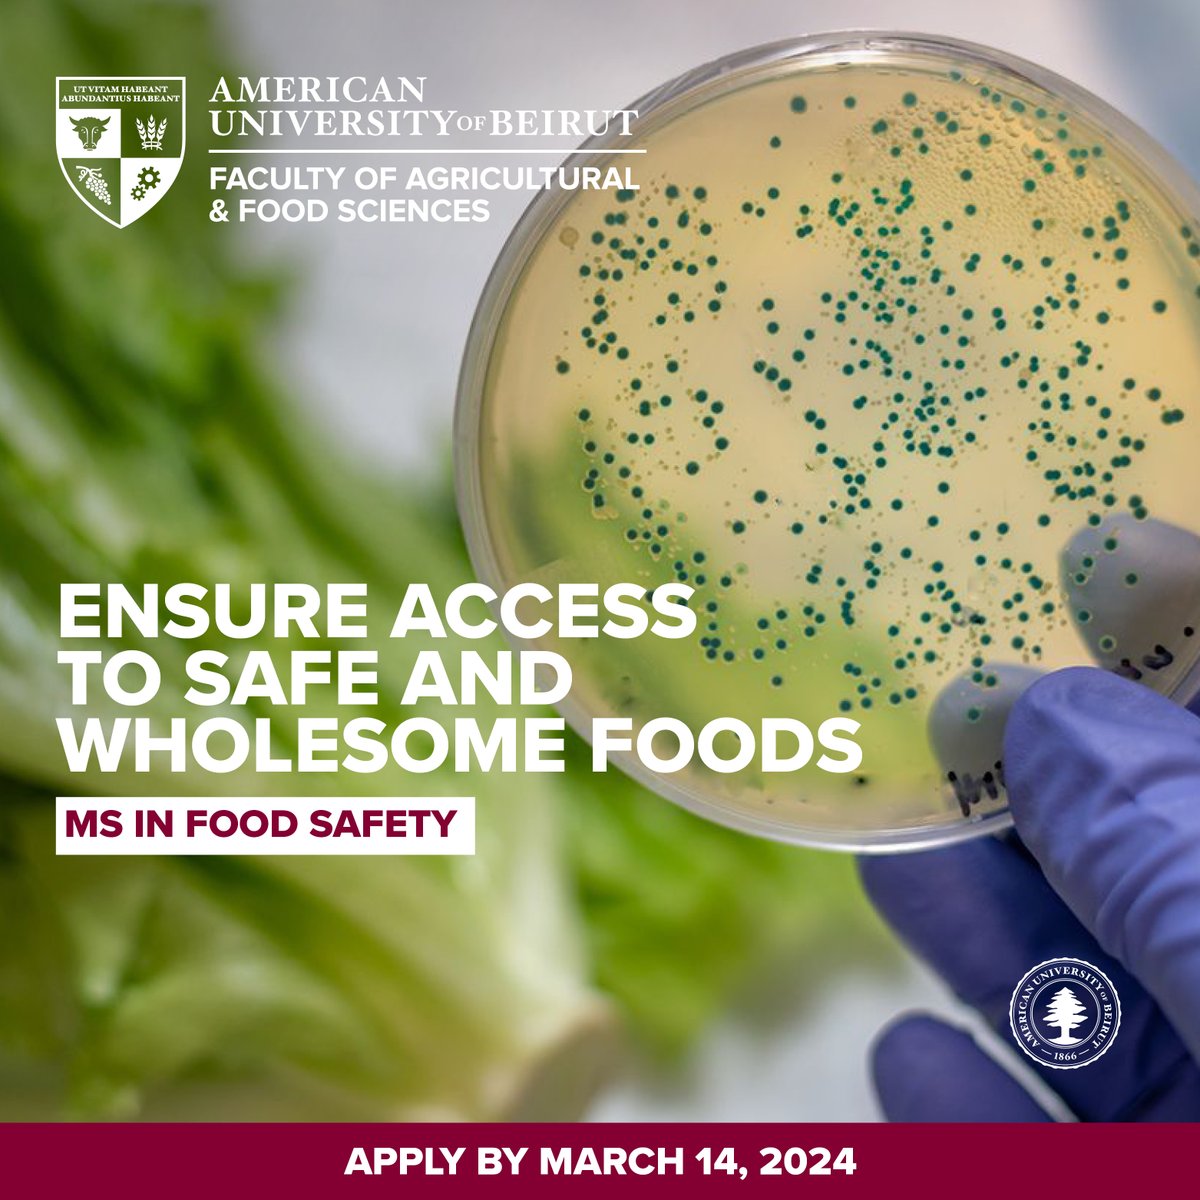 Impact the health & well-being of millions by preventing potentially deadly pathogens from contaminating our food supply. Apply to @AUB_Lebanon MS in Food Safety: aub.edu.lb/fafs/nfsc/Page…